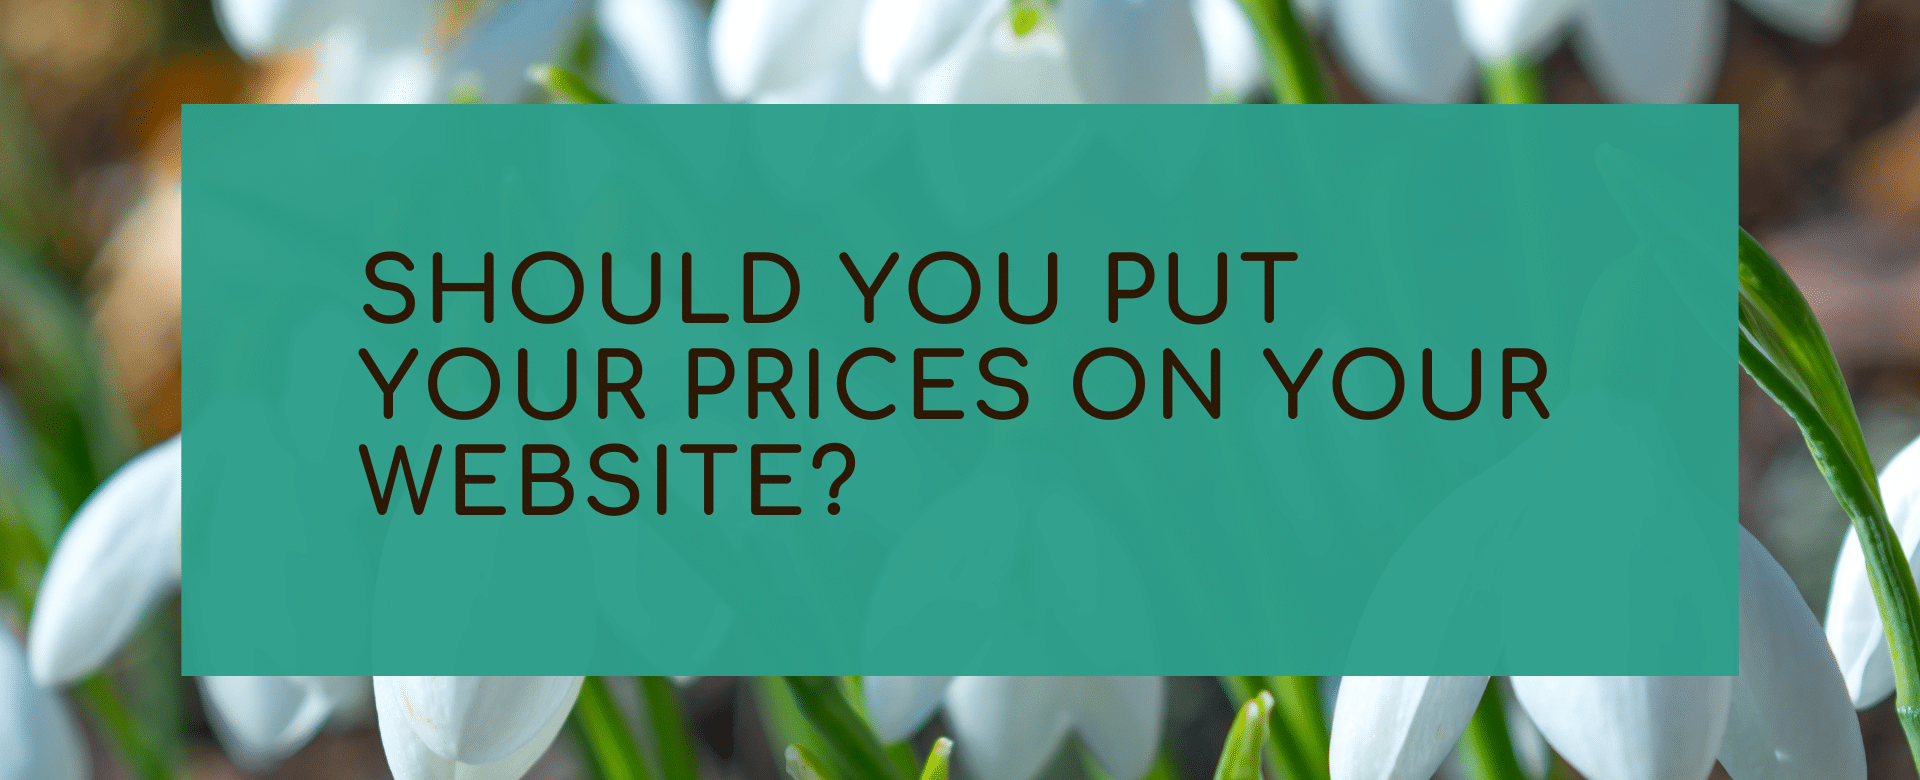 Snow drop background with a green inner box asking Should you put your prices on your website?